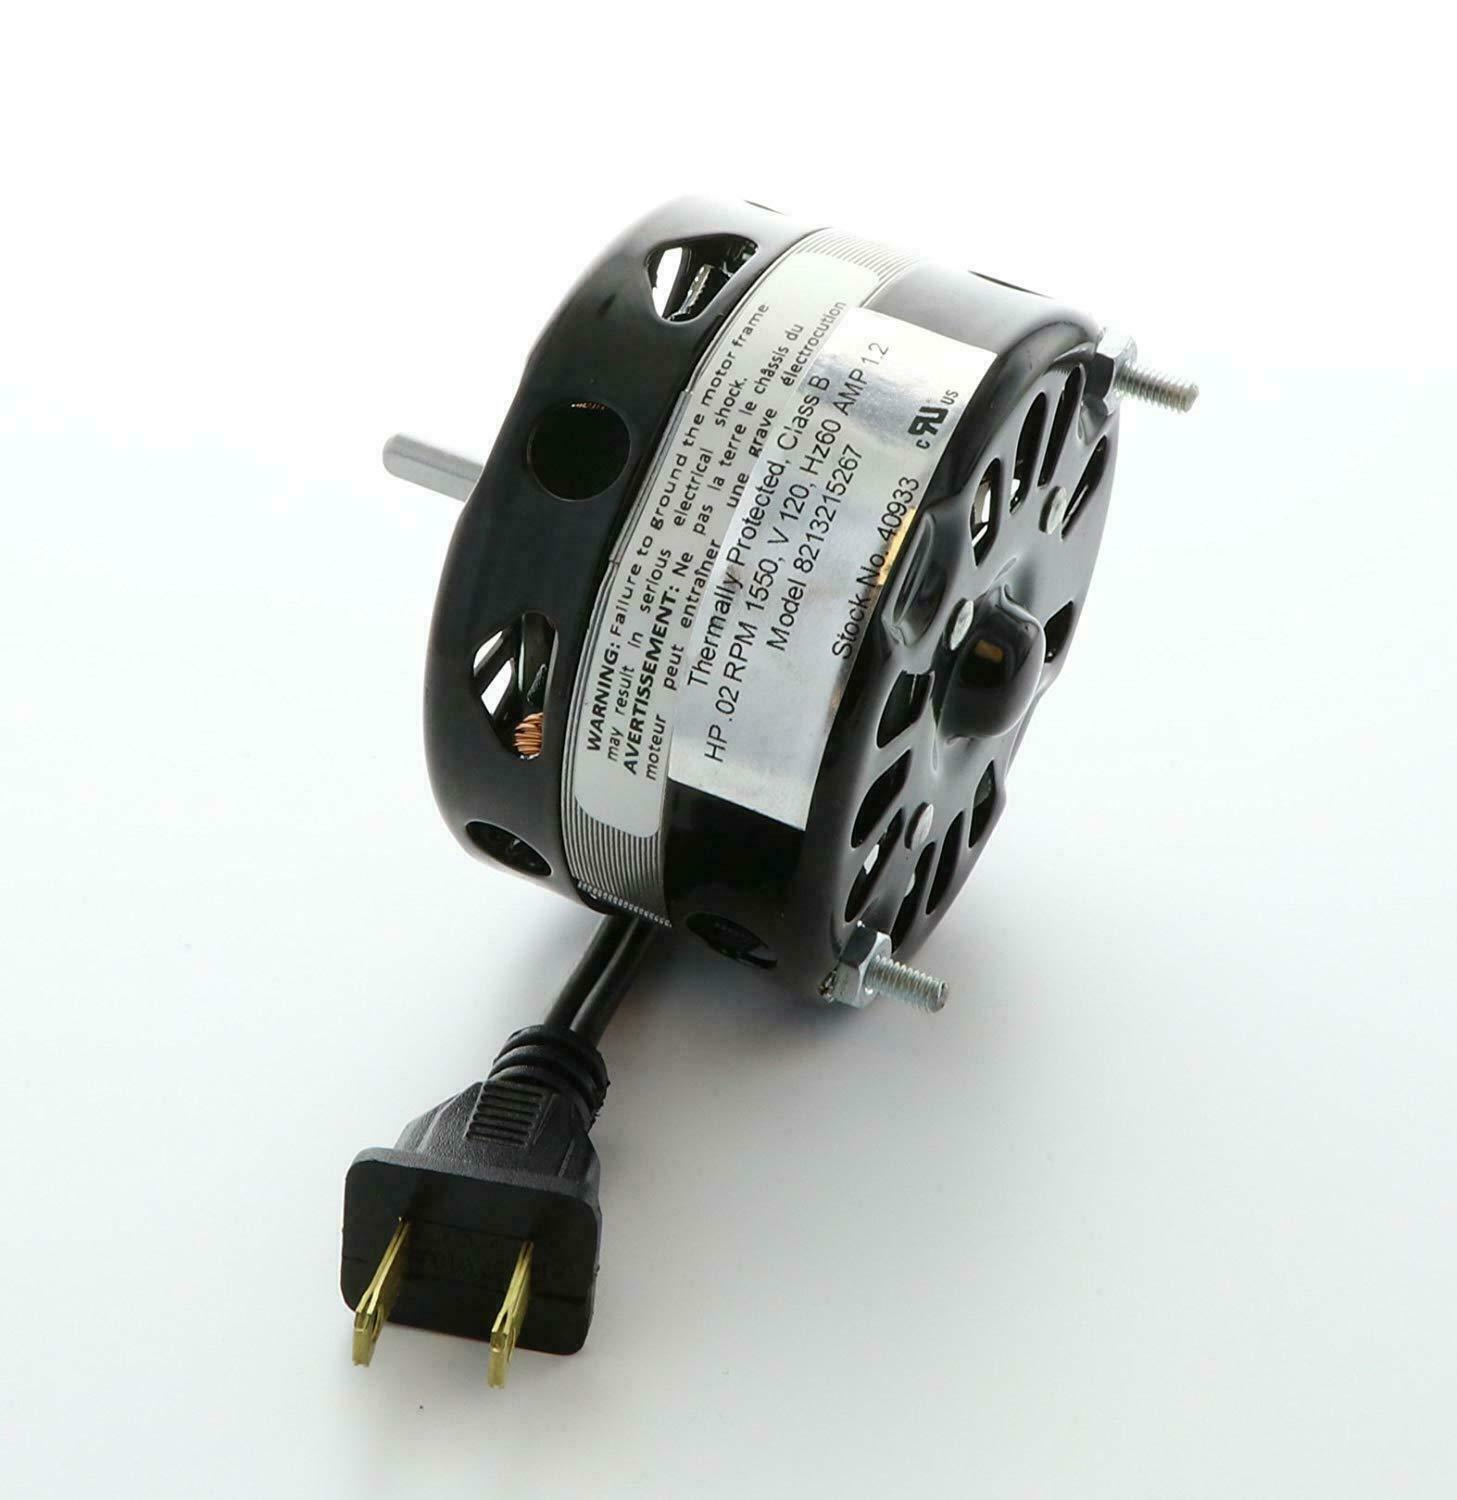 33 Ventilation Fan Motor 120v For Nutone Broan Bathroom Kitchen Exhaust Blower within proportions 1457 X 1500